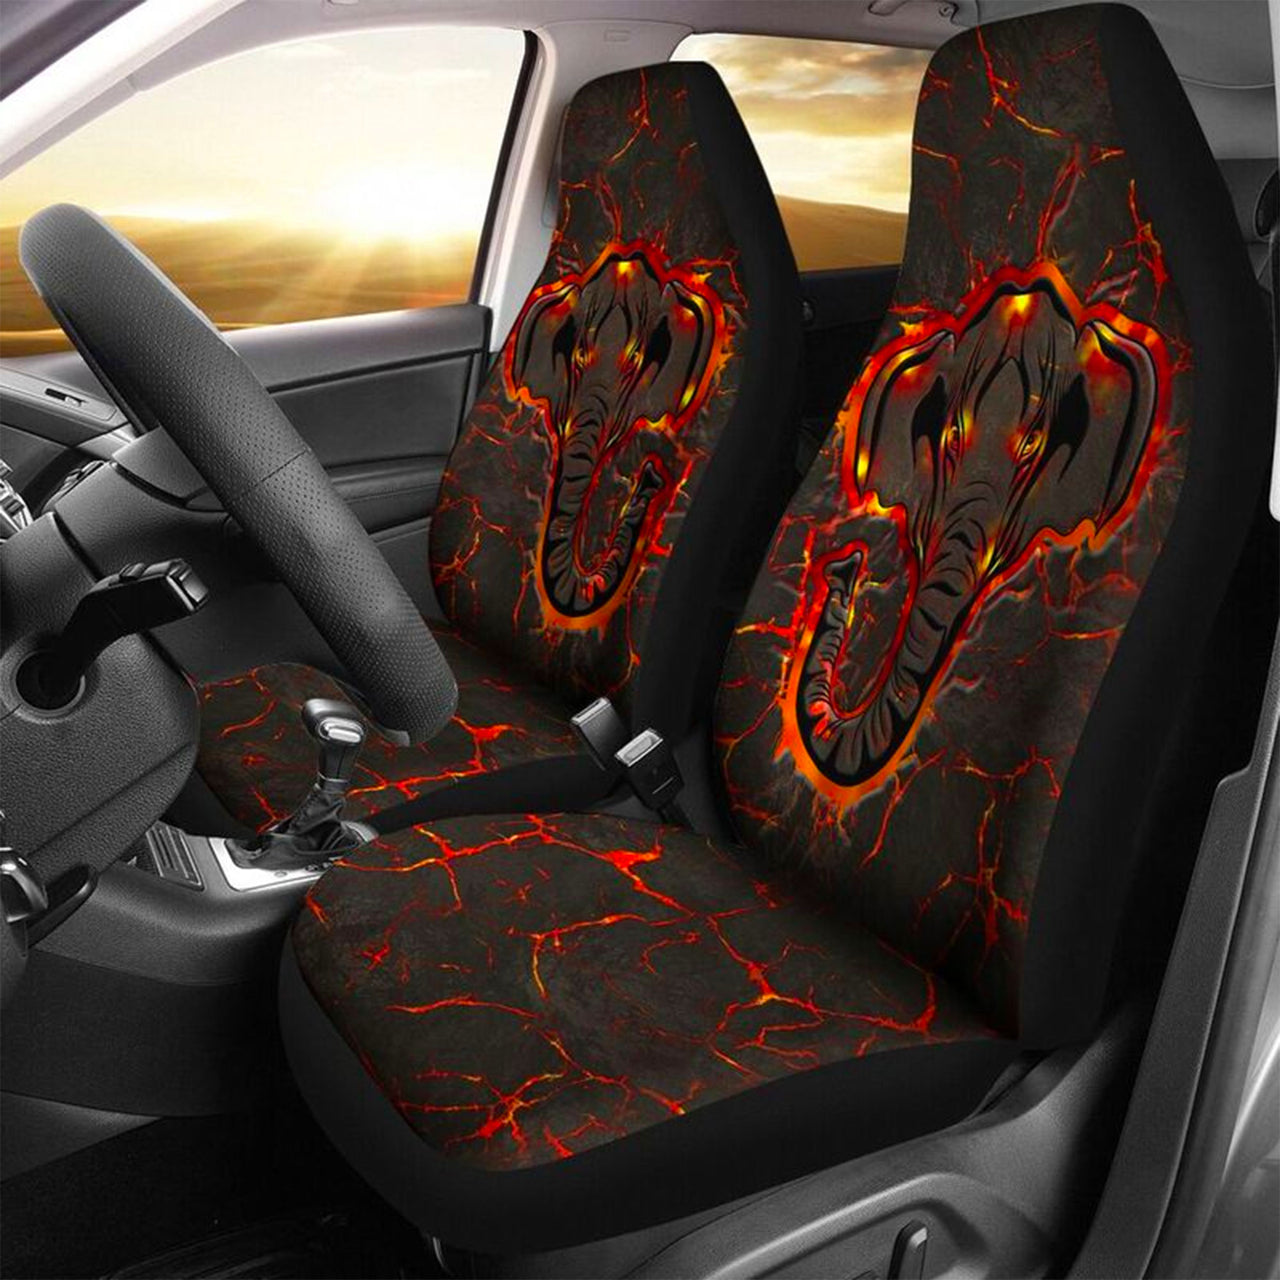 Custom Car Seat Cover Elephant In Laka Crack Ground Seat Covers for Cars